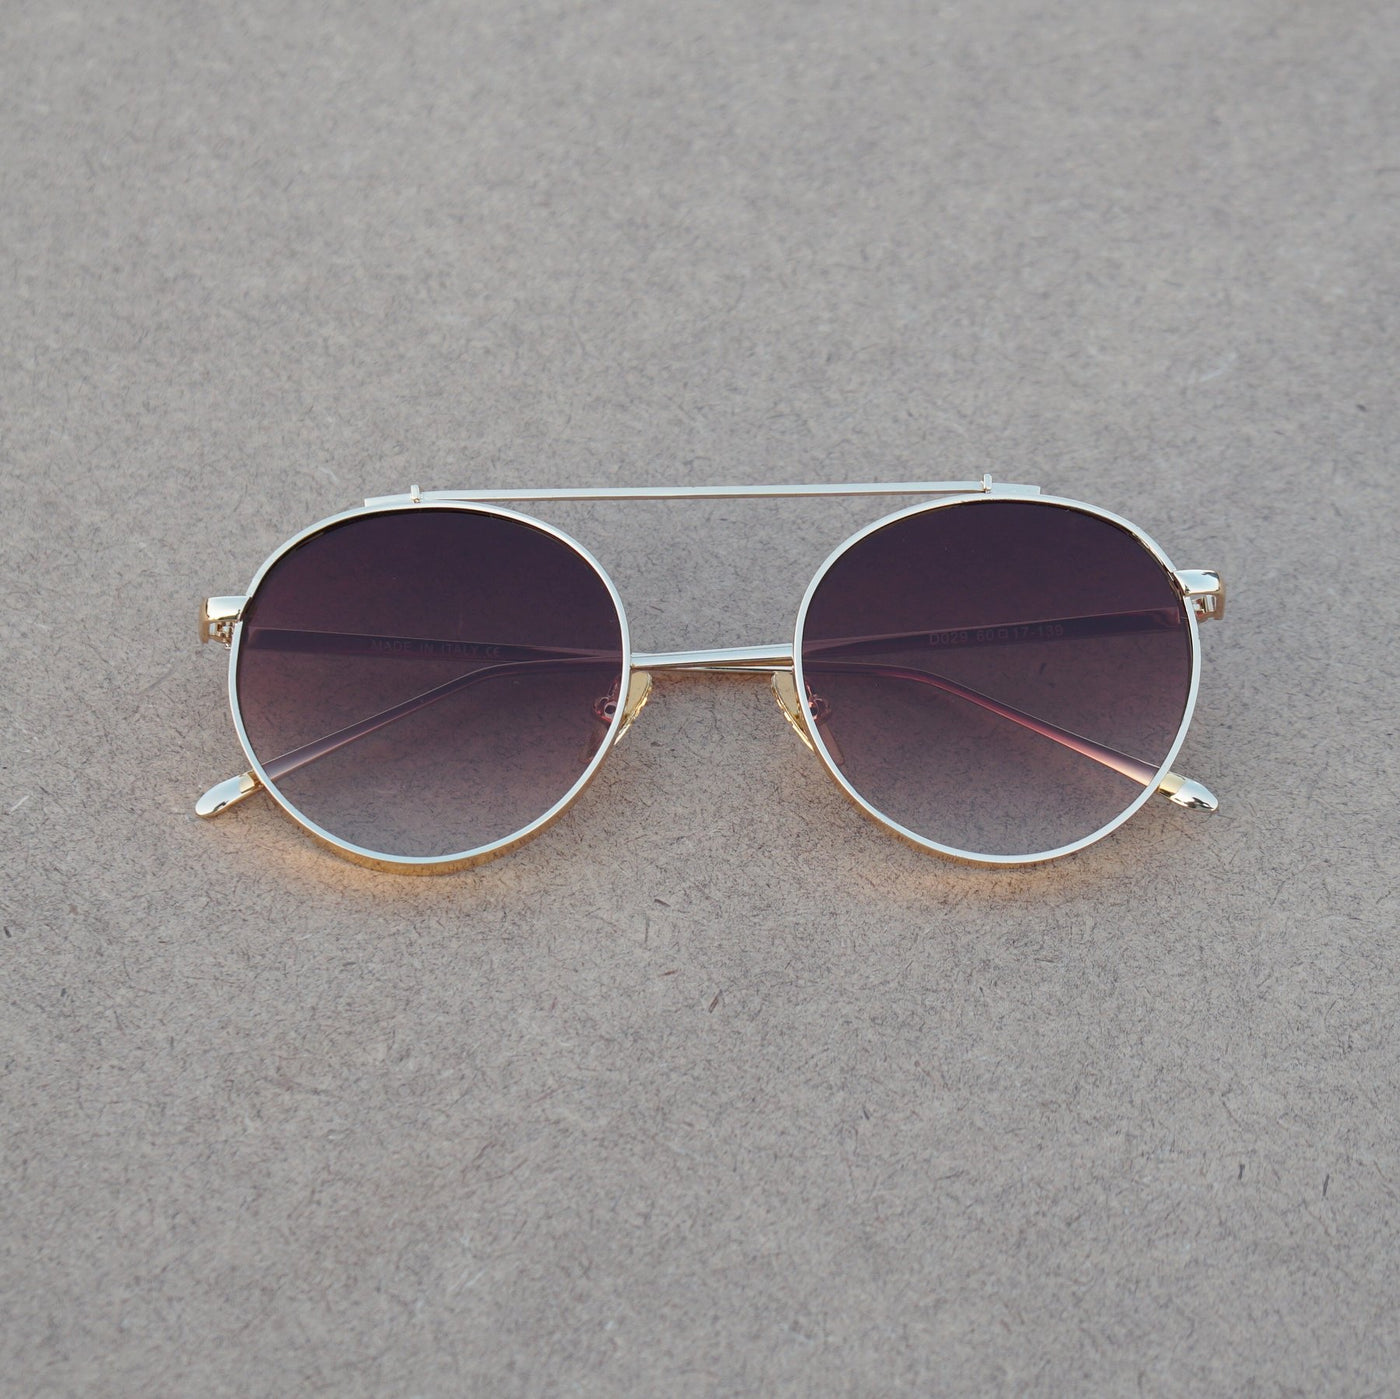 Round Shaded Brown And Gold Sunglasses For Men And Women-Unique and Classy